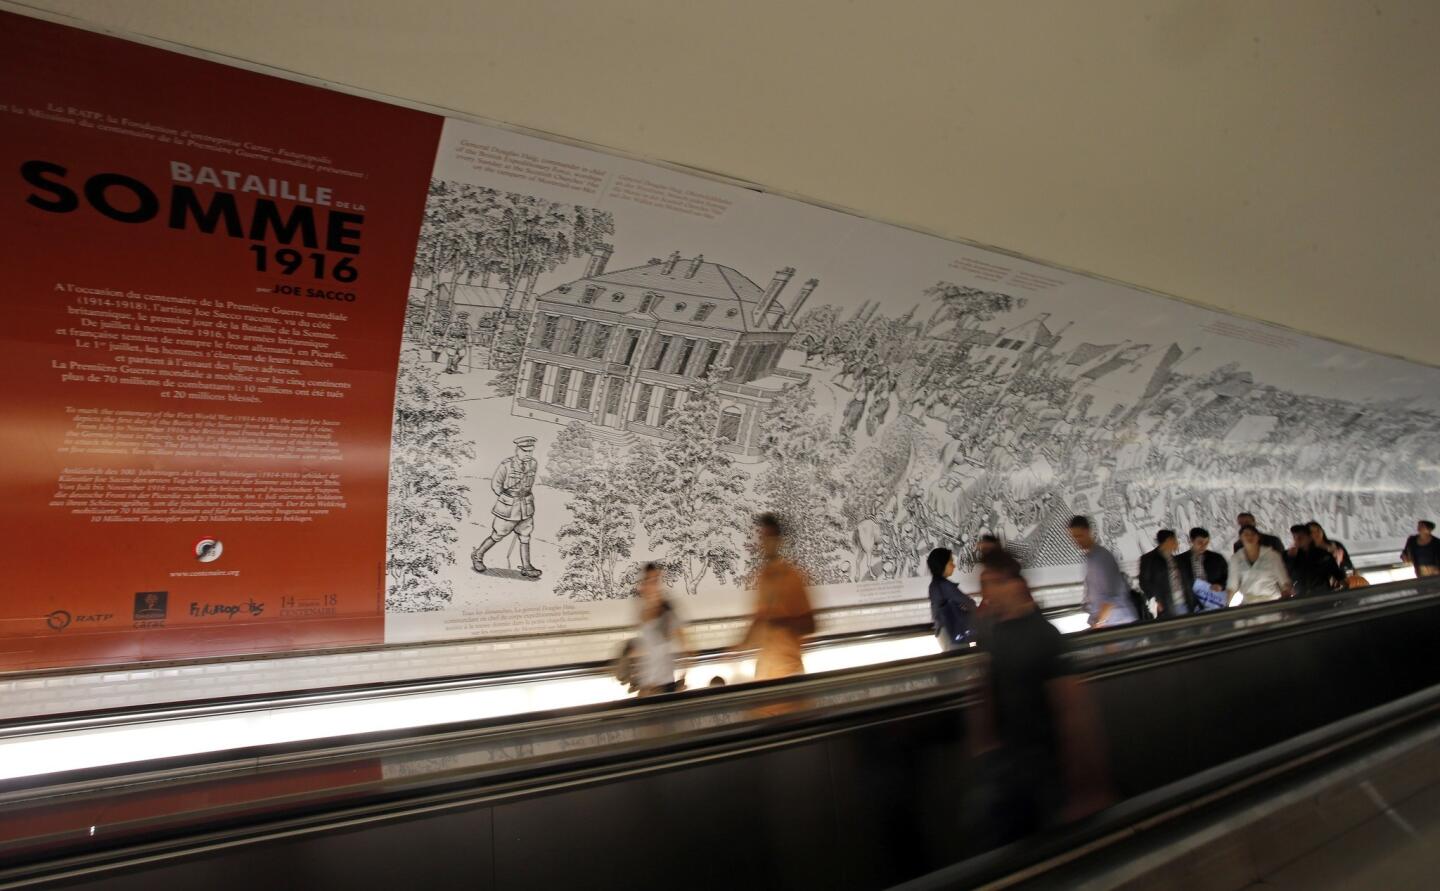 Joe Sacco's massive cartoon mural "The Great War," which depicts the first day of the World War I 1916 Battle of the Somme, stretches along the wall of the Montparnasse Metro station in Paris.